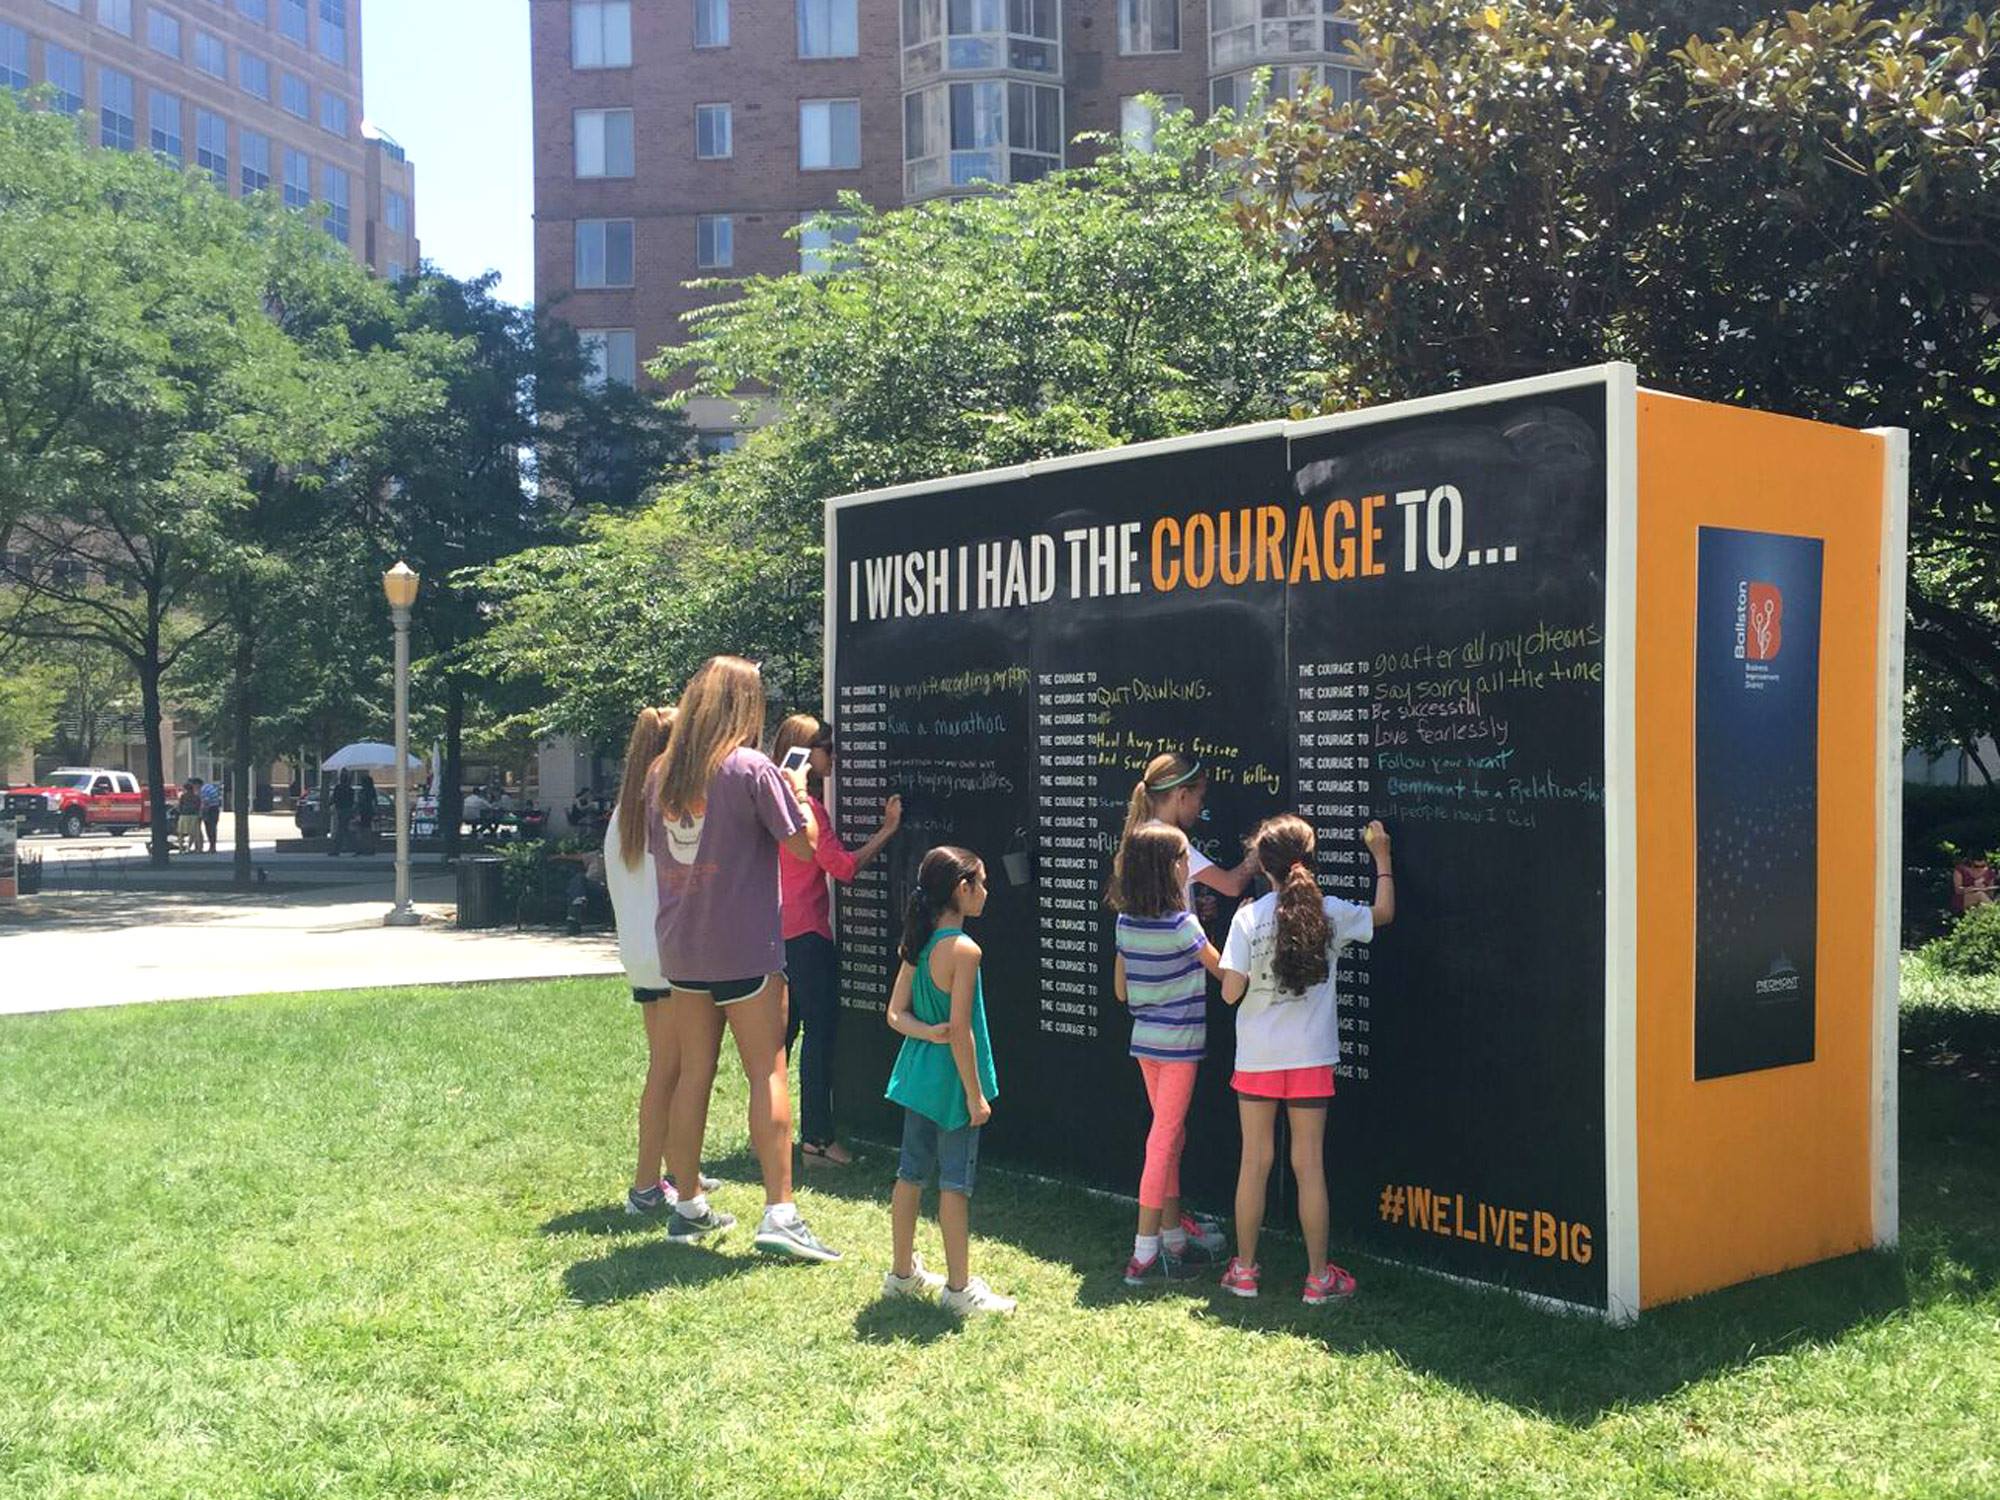 Courage Wall: The Arlington Patch, June 2015